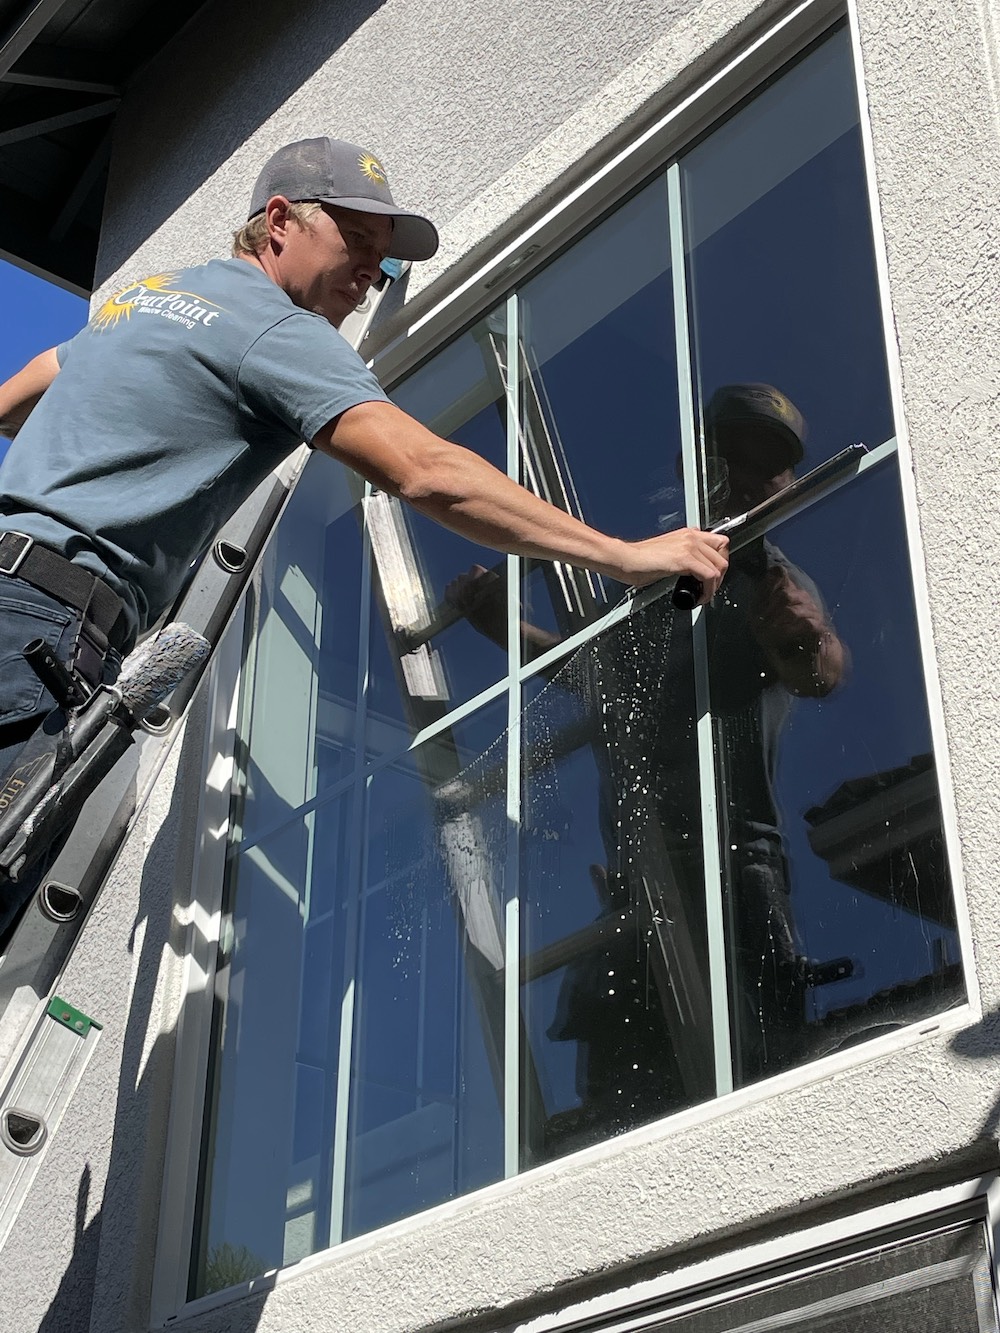 Window Cleaning Services  Residential Window Washing